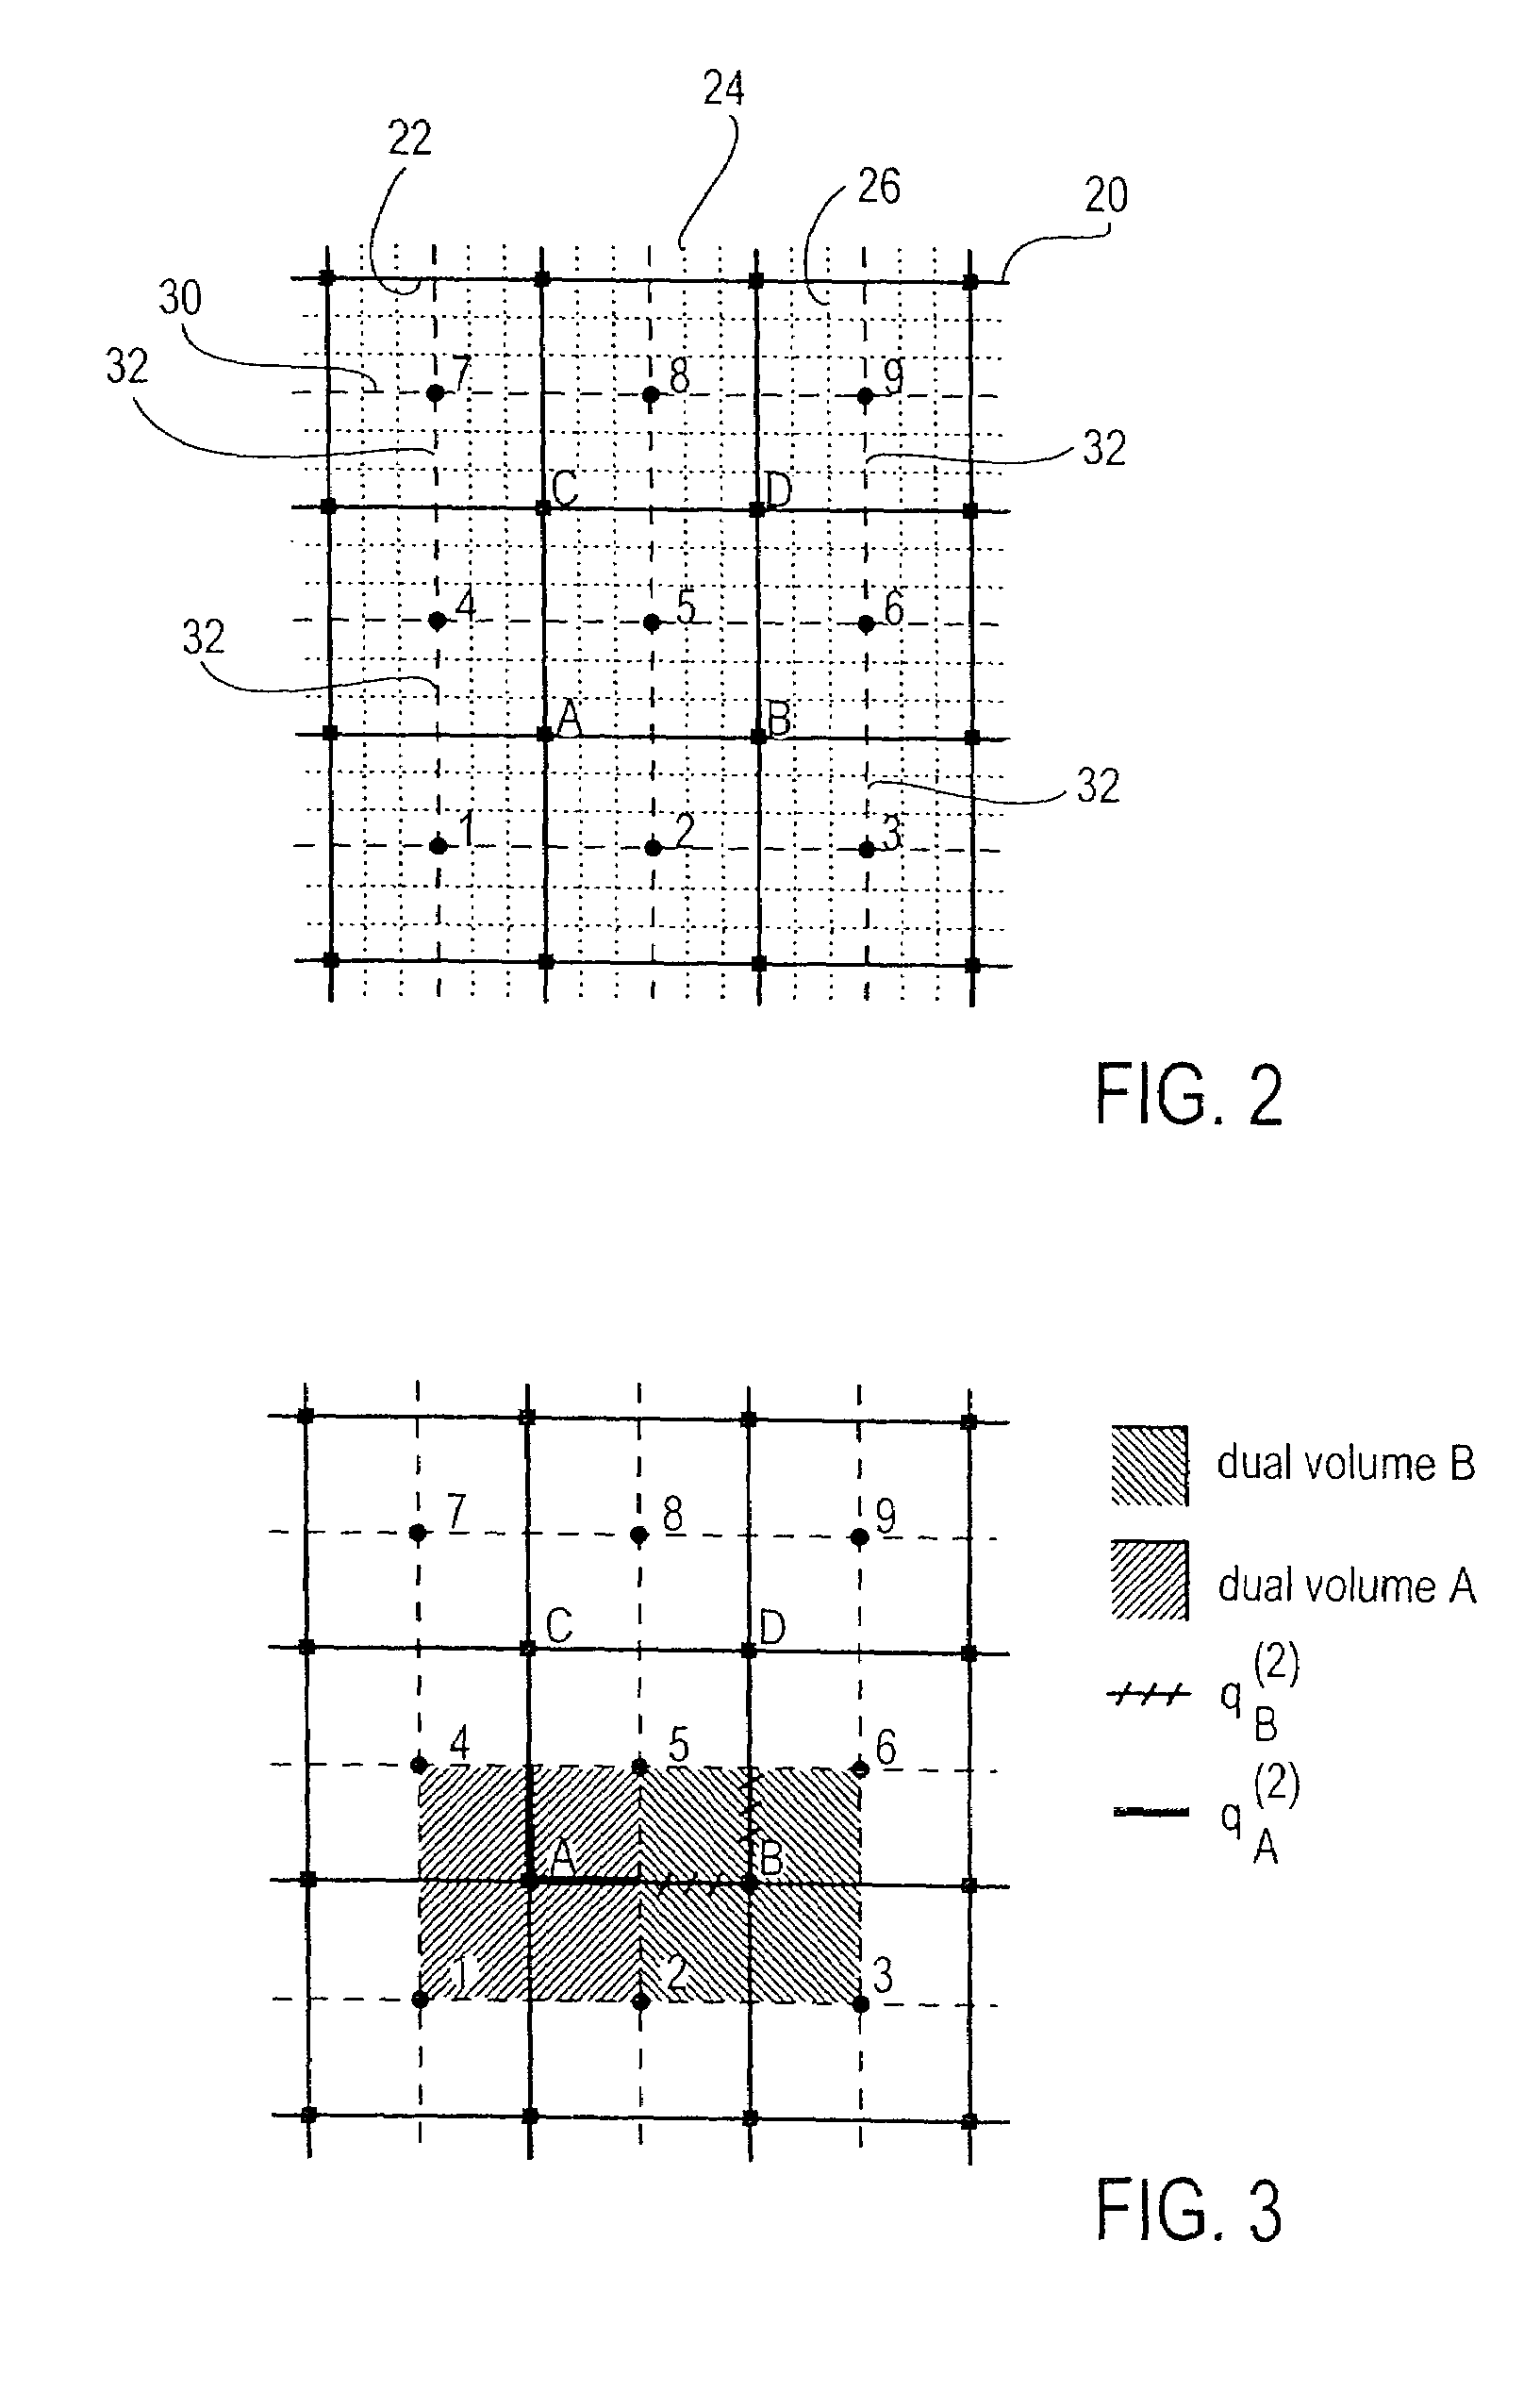 Multi-scale finite-volume method for use in subsurface flow simulation